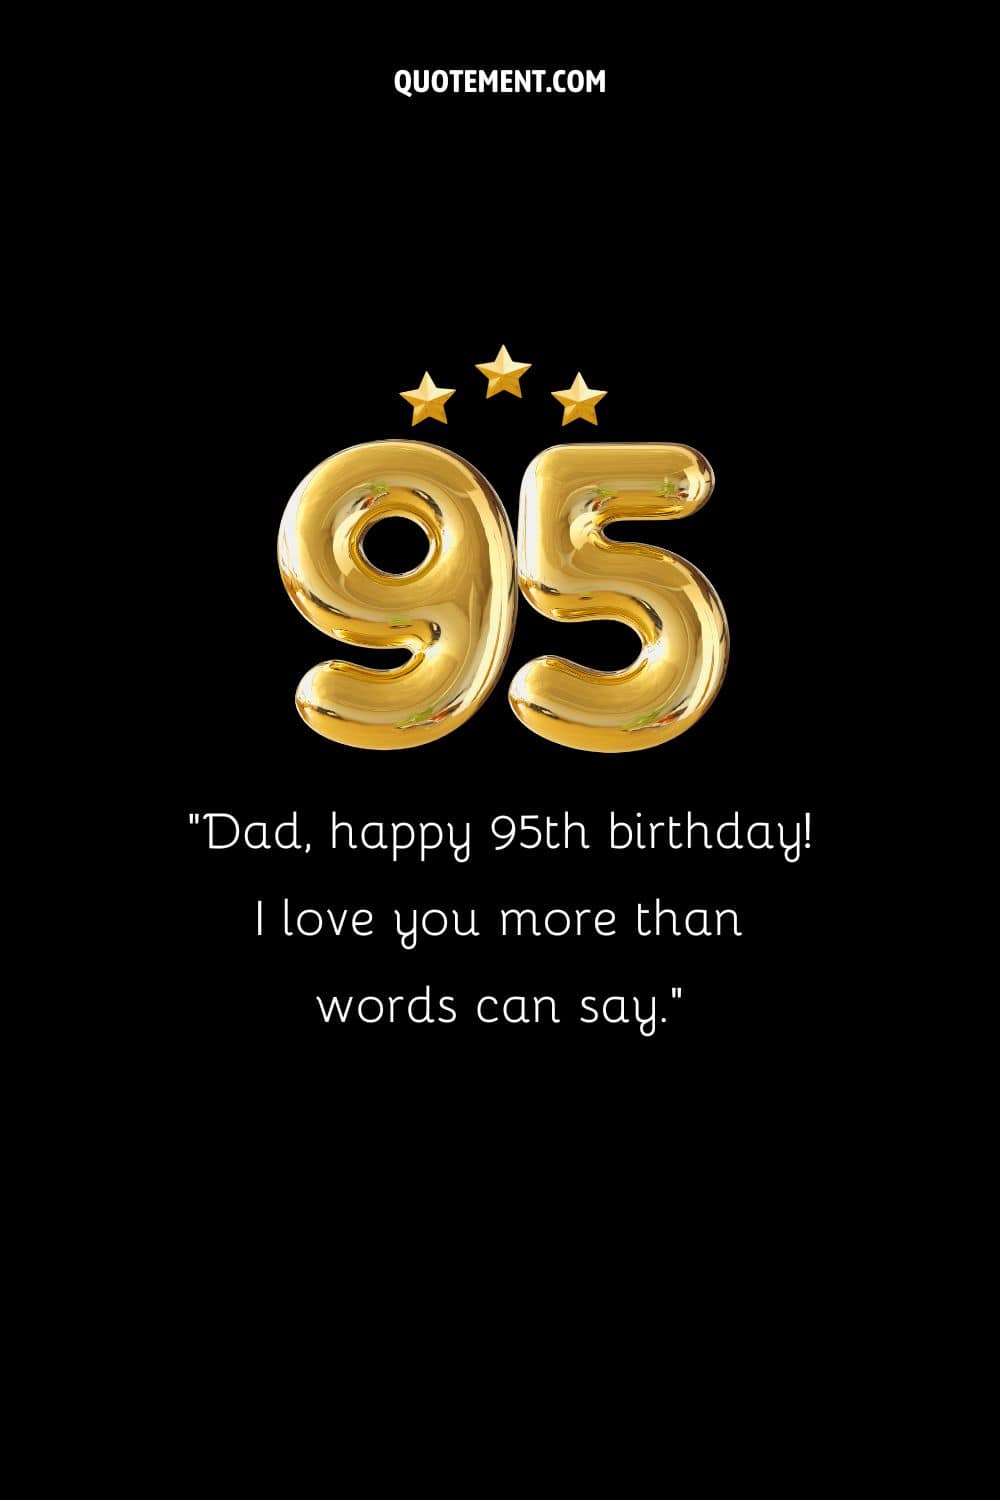 “Dad, happy 95th birthday! I love you more than words can say.”